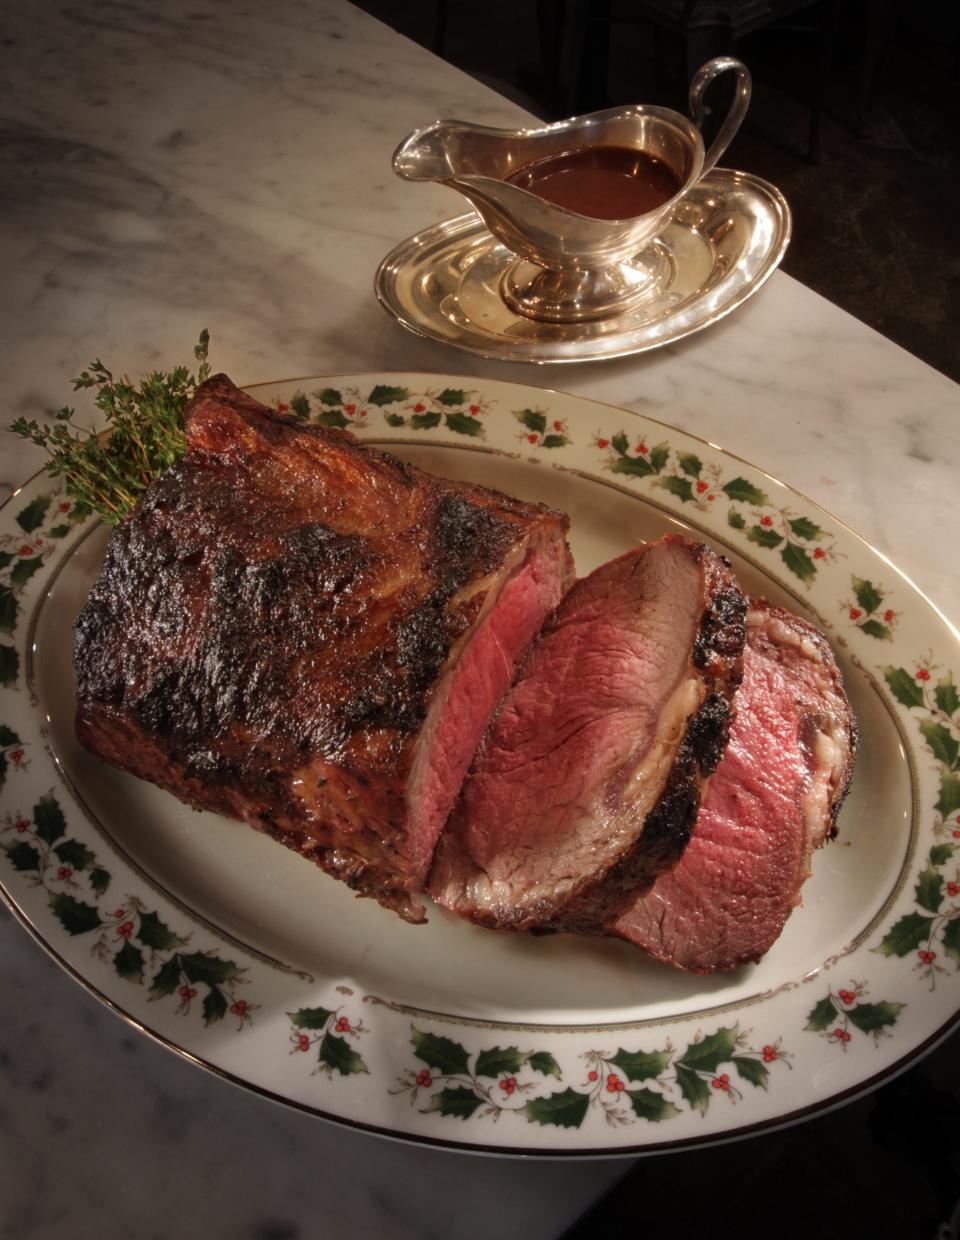 This festive Christmas Roast of Sirloin was prepared by chef Nick Rabar. See his recipe for a merry holiday dinner.